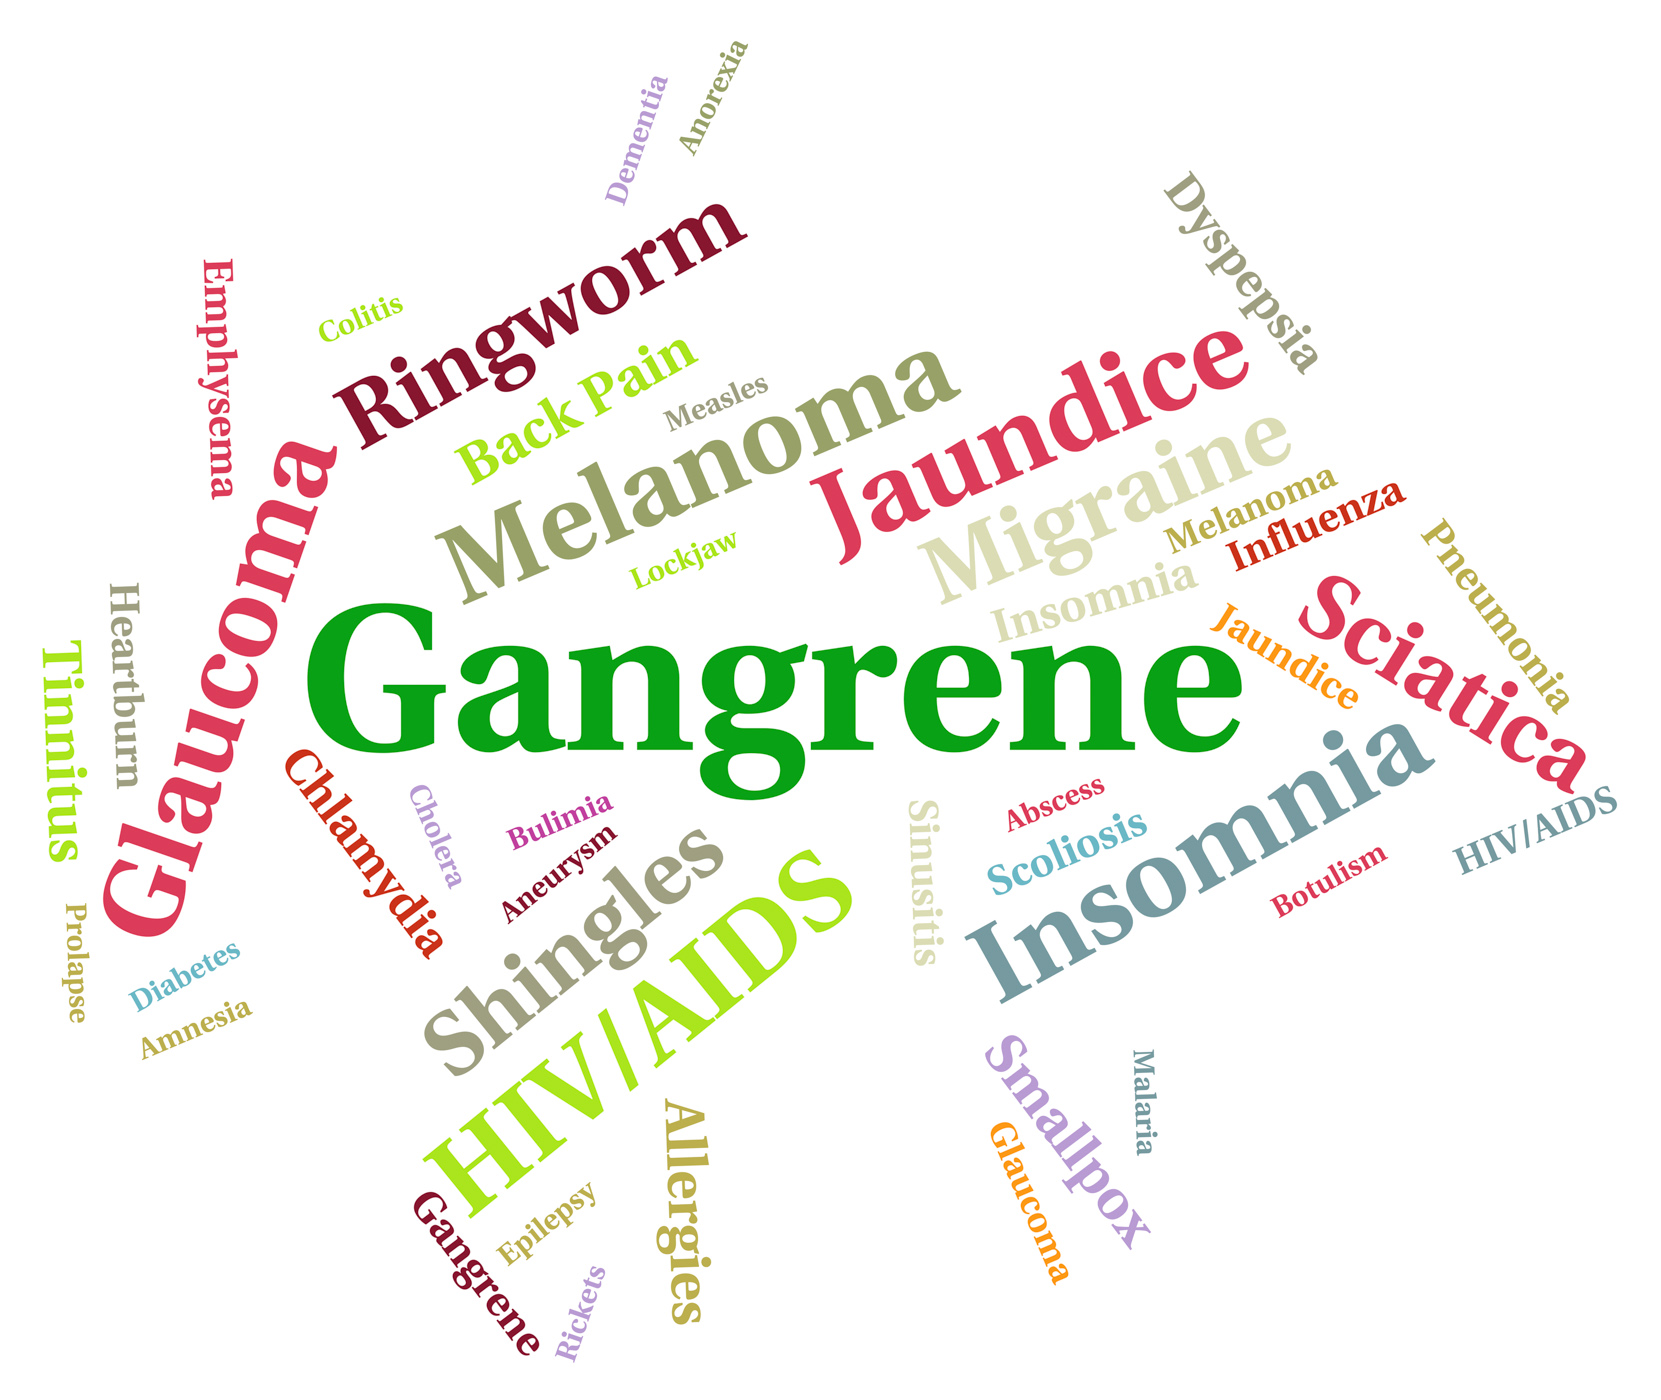 Gangrene illness represents infection necrosis and gangrenous photo